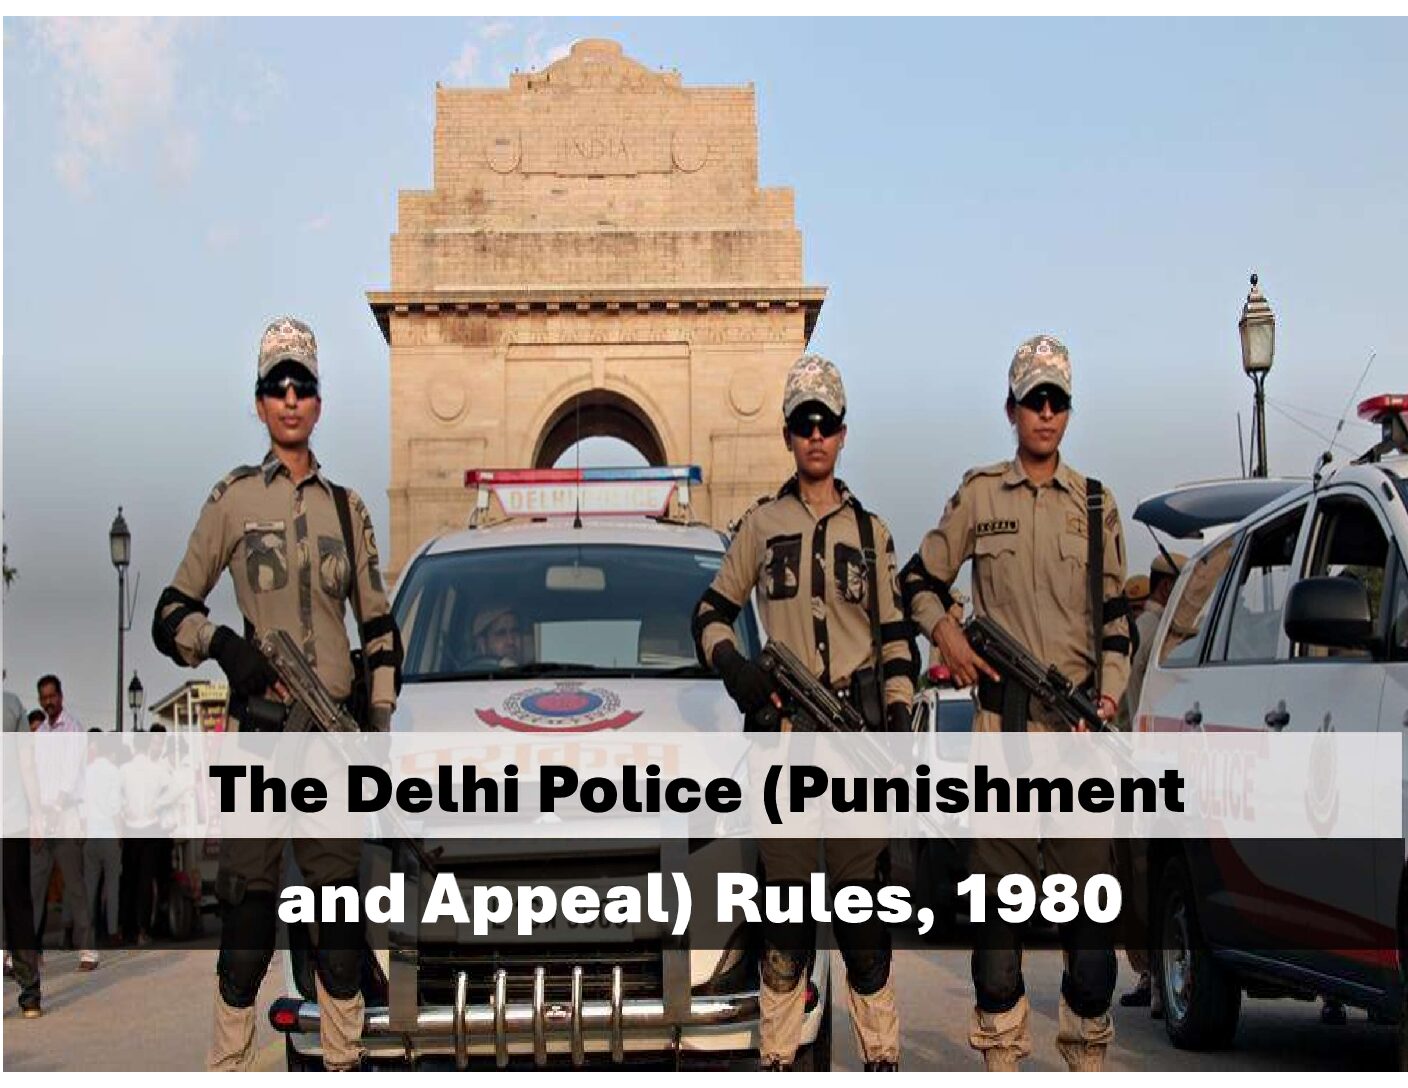 The Delhi Police (Punishment and Appeal) Rules, 1980